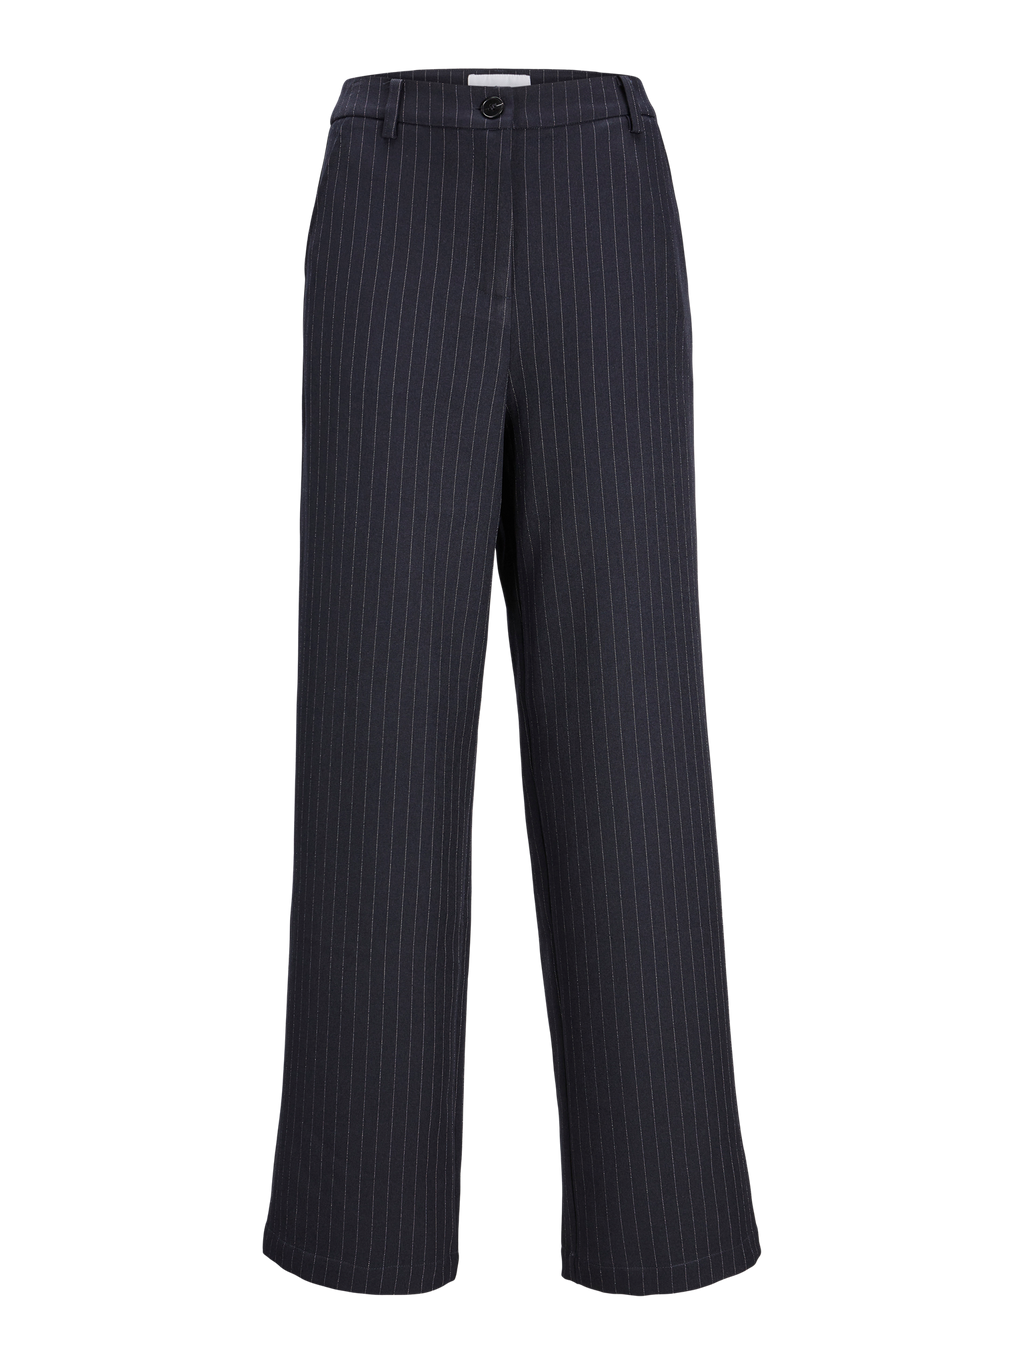 Classic Suit Trousers - Navy Pinstripe